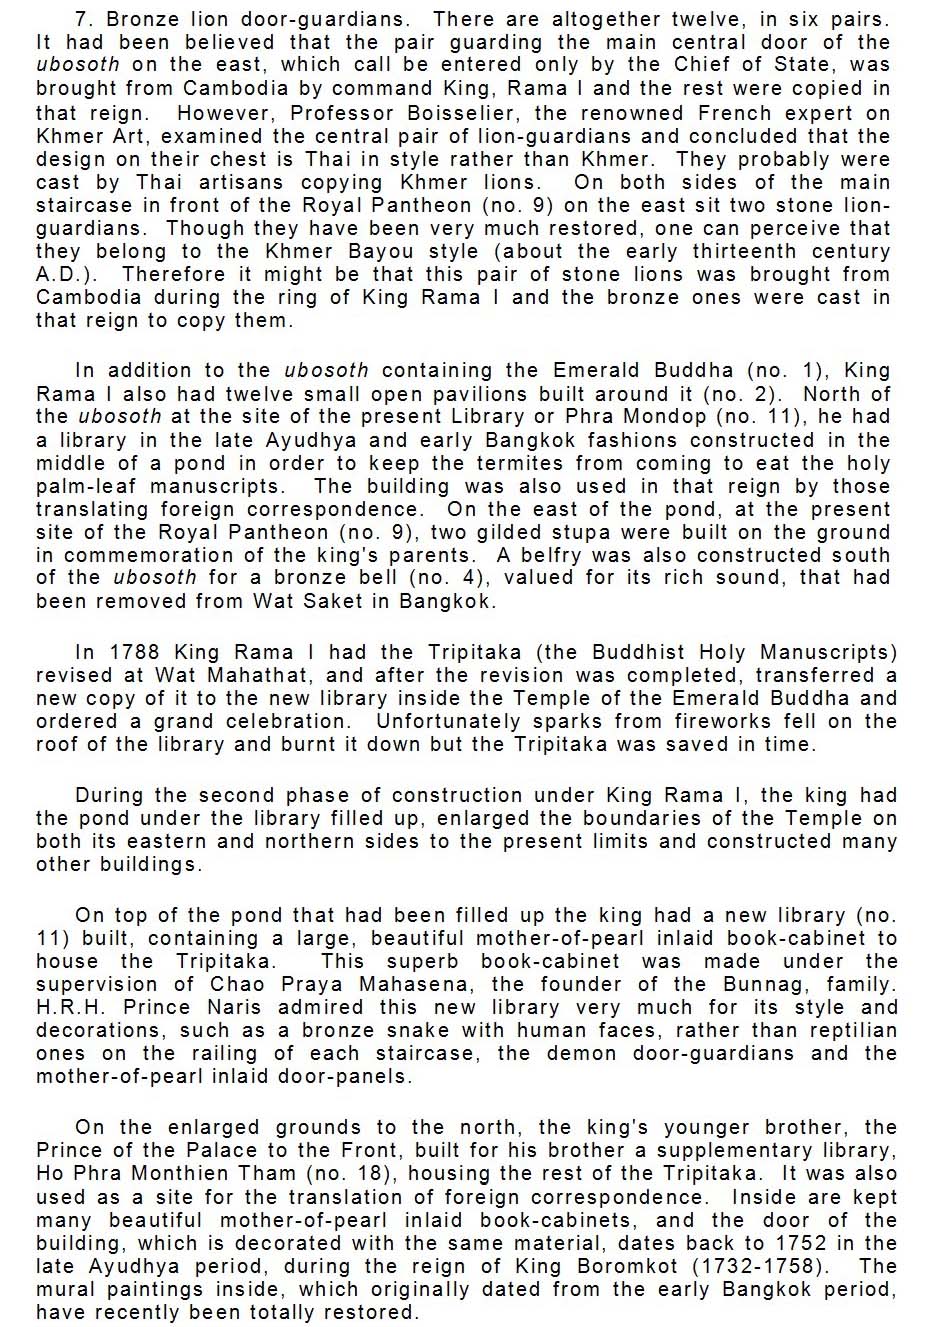 History of the Emerald Buddha page 5